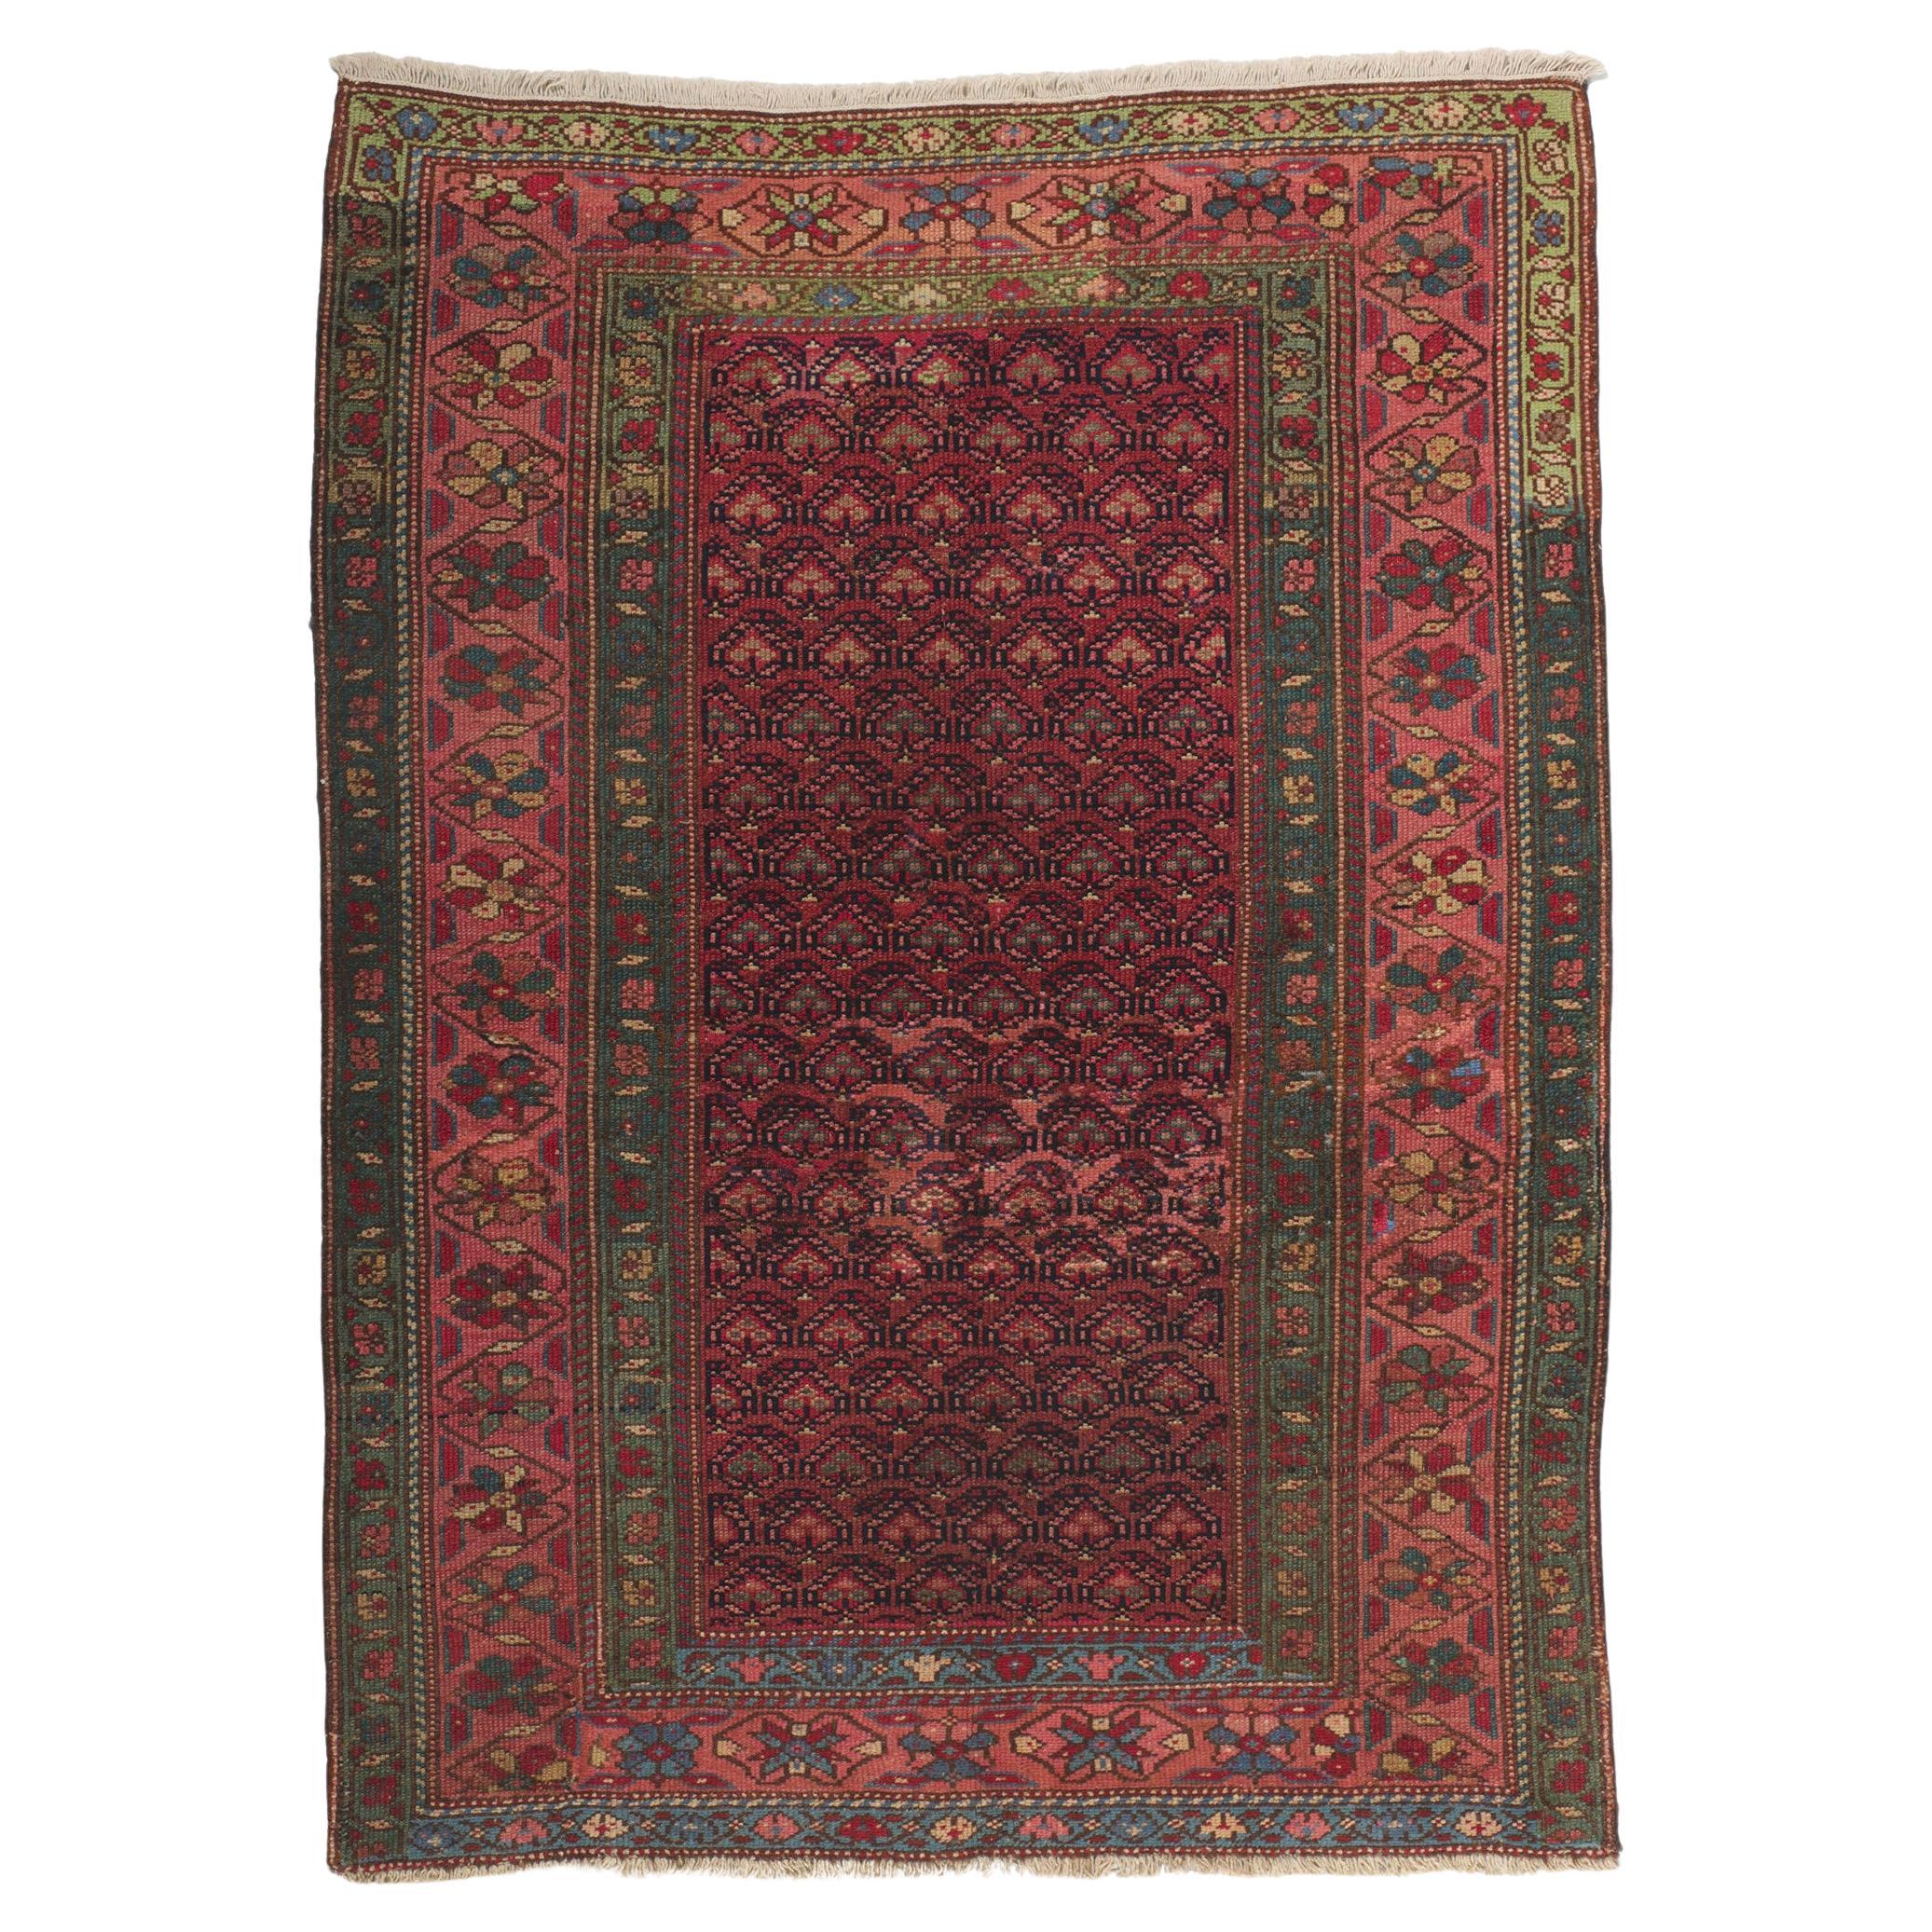 Antique Persian Malayer Rug with Boteh Pattern